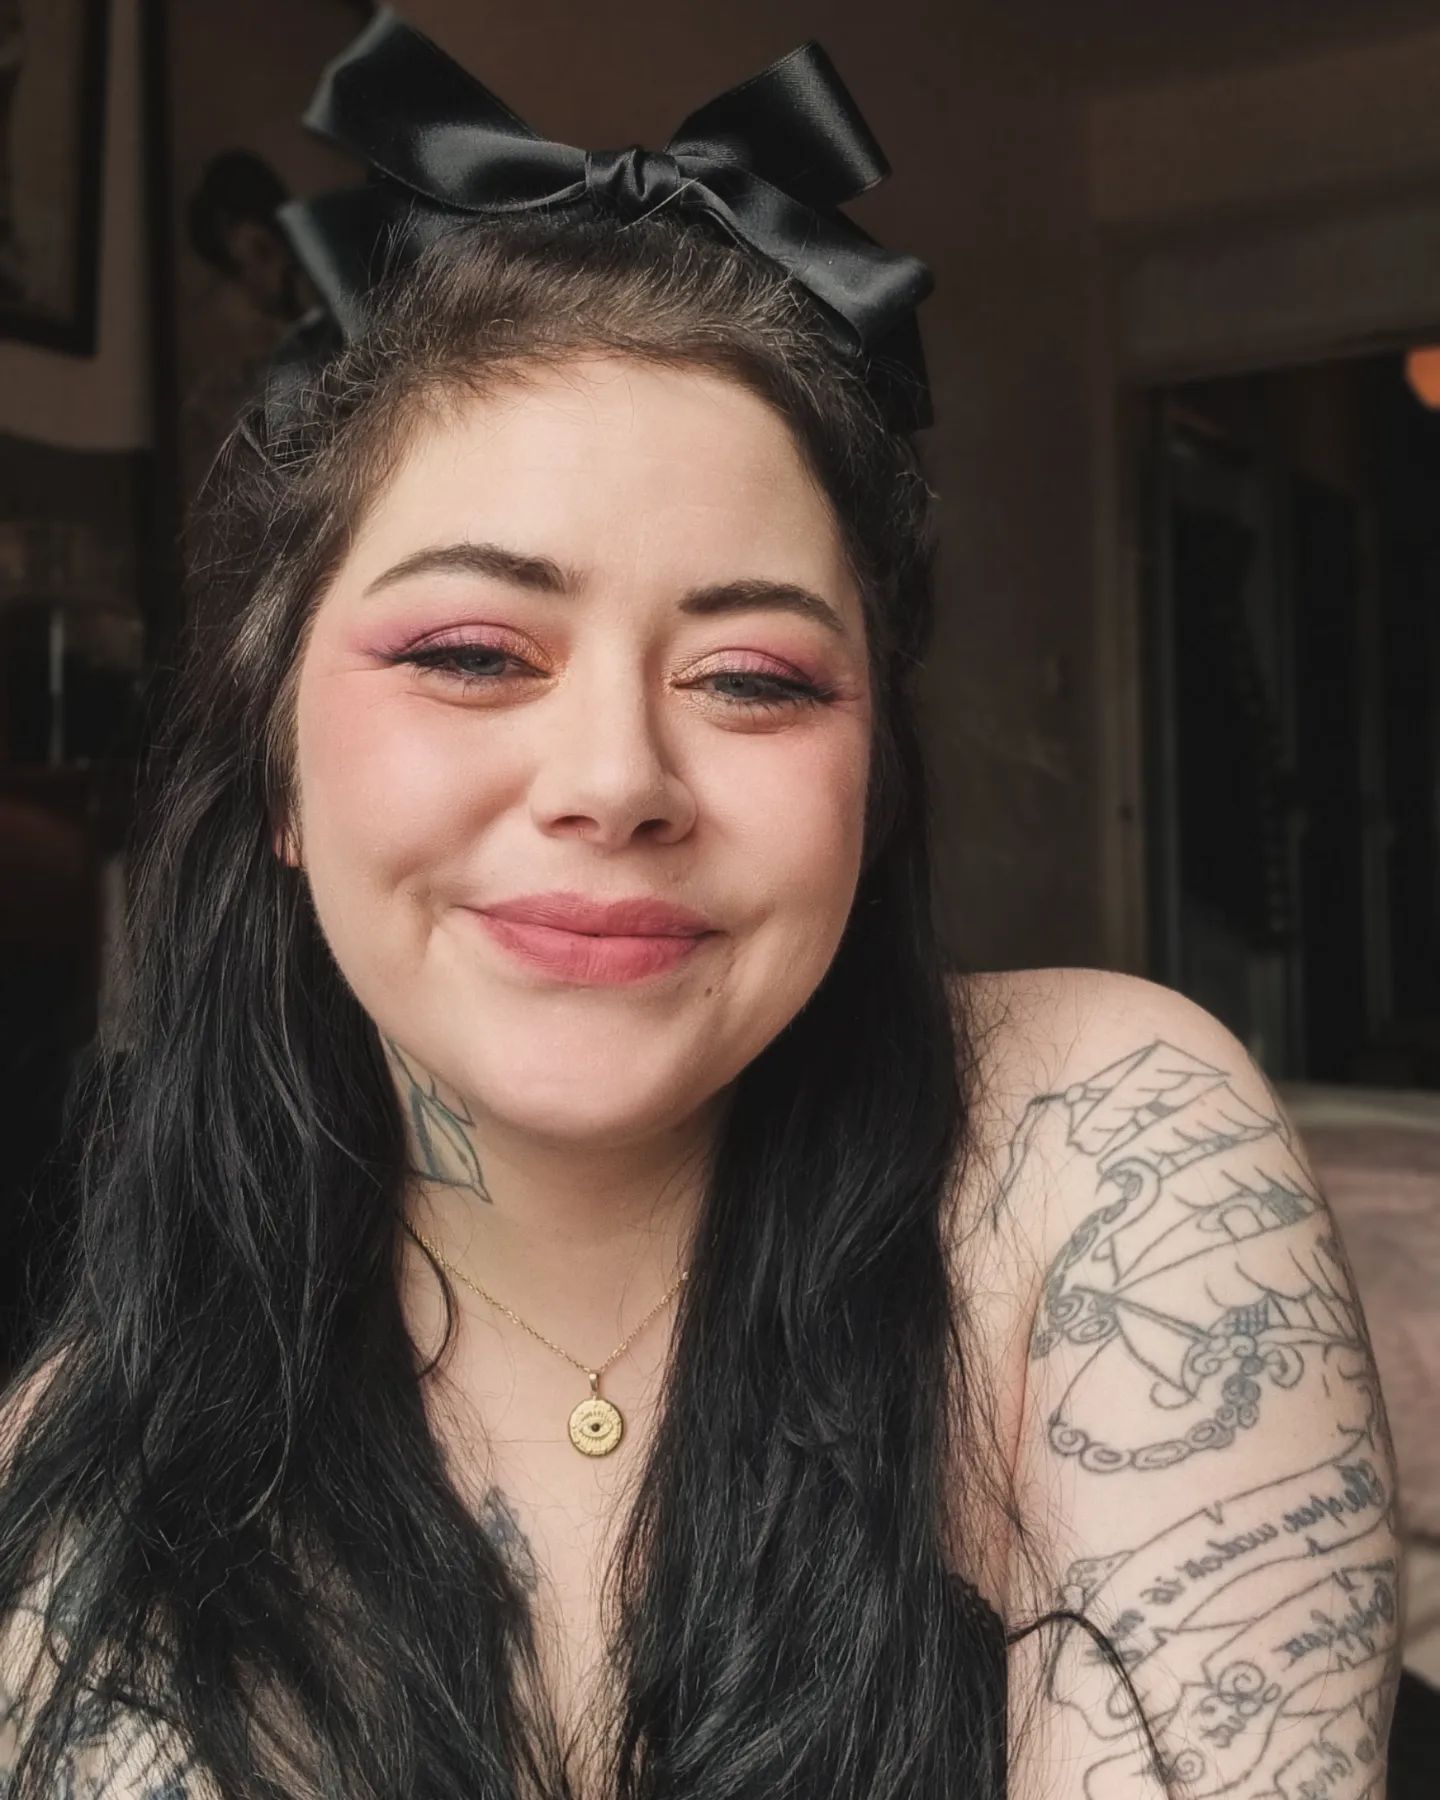 Full face of @madebymitchell and smiling because I finally did my face after 10 days of panic attacks! Some products linked.
.

.

.

.

.

.

.

.
#tattooedwomen
#madebymitchell #tattooedgirls #tattooedmodel #smile #hairbow #ethot #gothgirl #girlswithtattoos #tattooed #eveileyejewelry #blackhair #aginggracefully #36